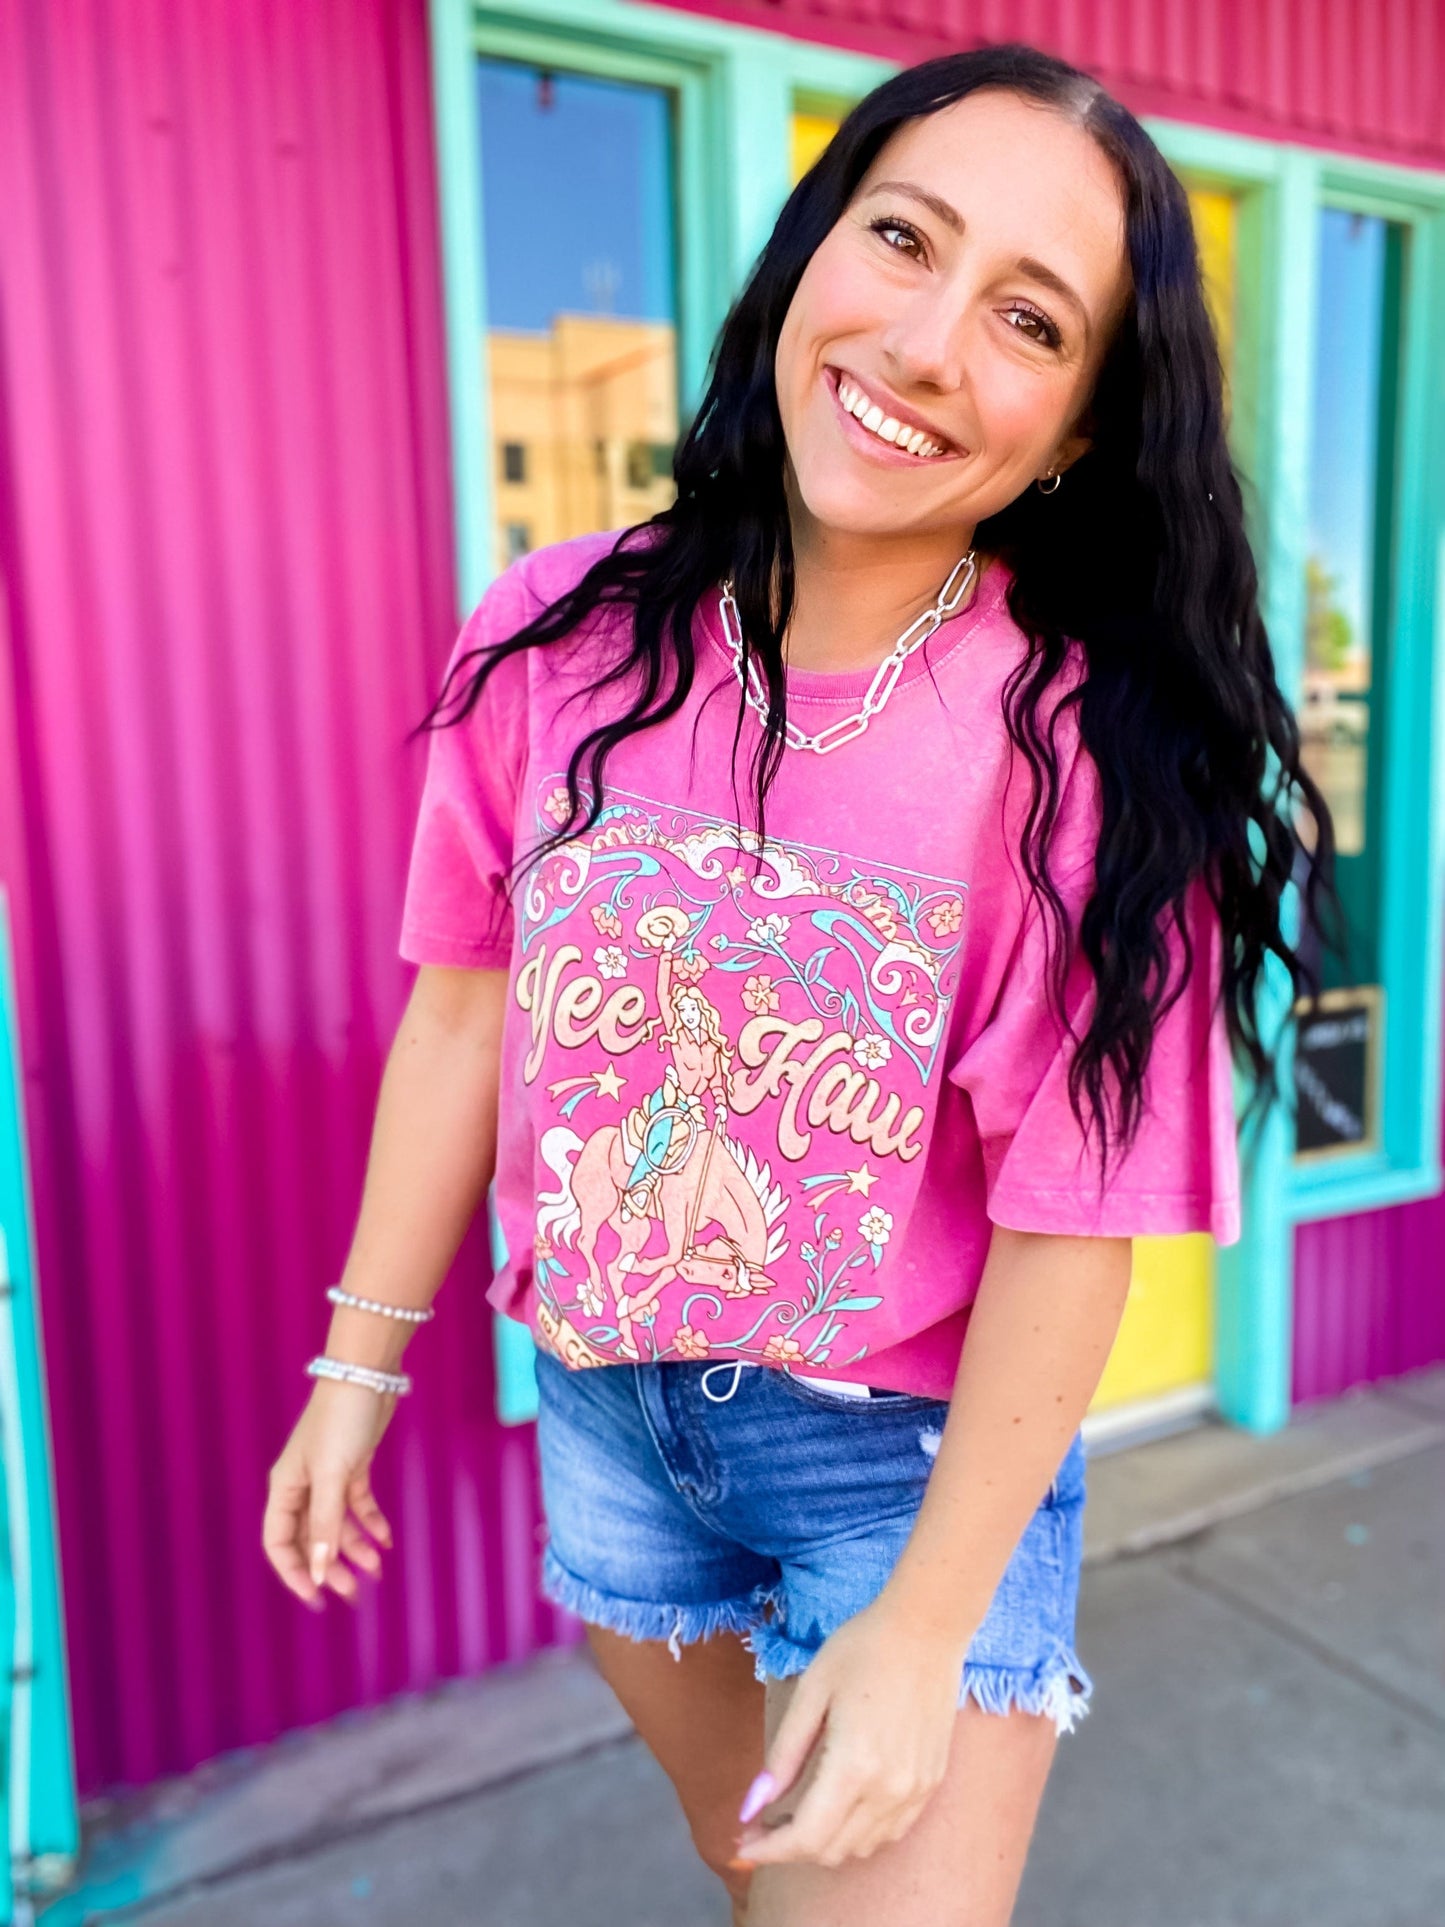 Graphic Tees Yeehaw Mineral Washed Tee in Hot Pink